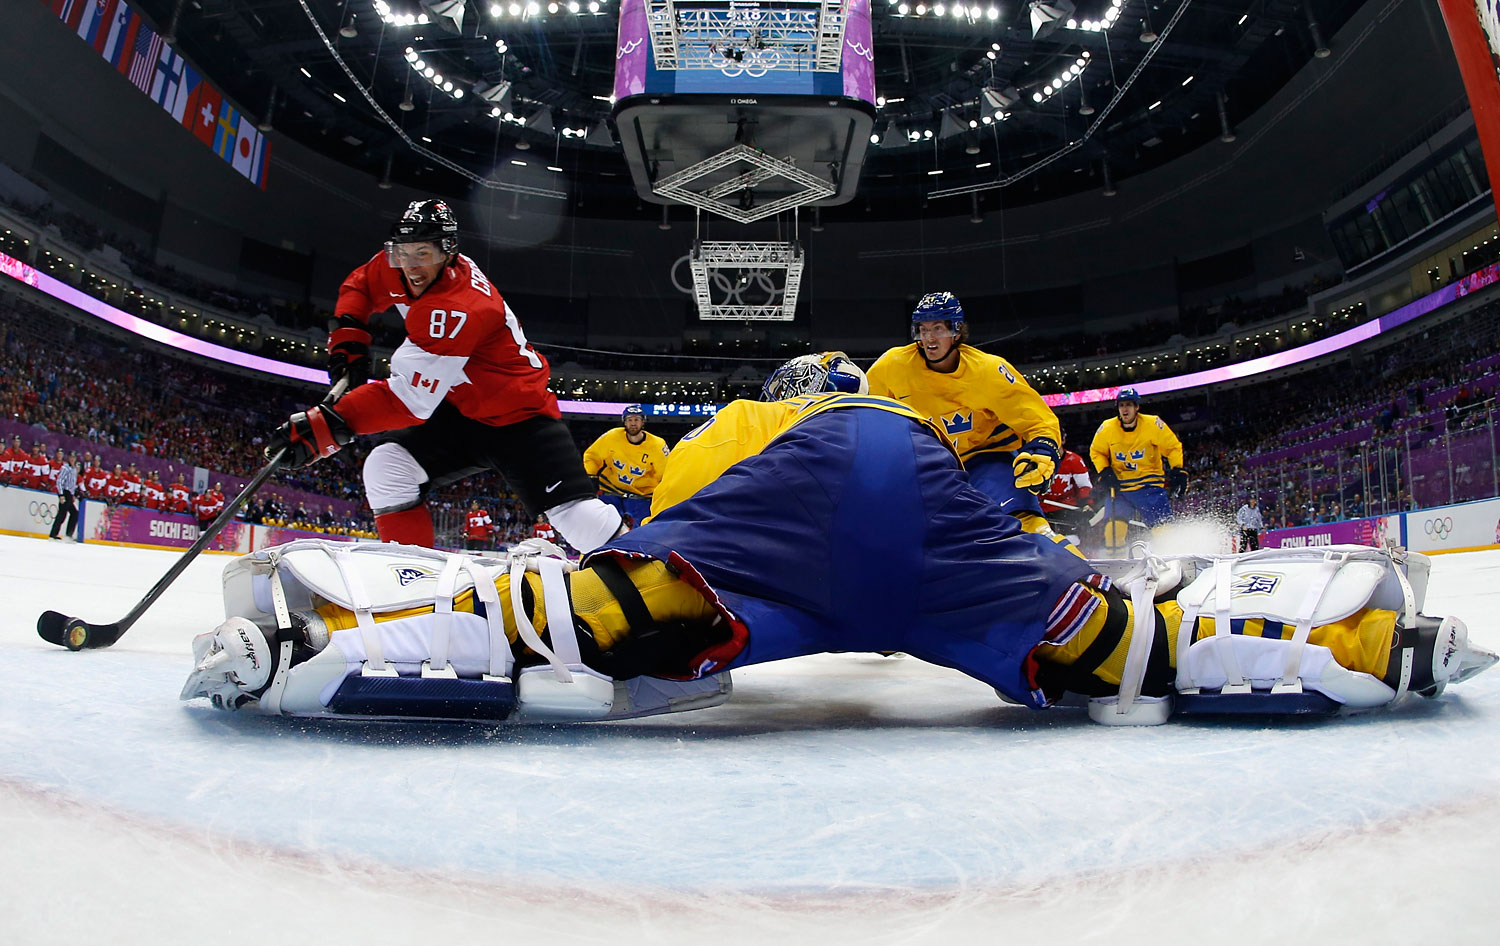 Canada's Sidney Crosby (87) scores on a breakaway past Sweden's goalie Henrik Lundqvist during the second period of their men's ice hockey gold medal game.